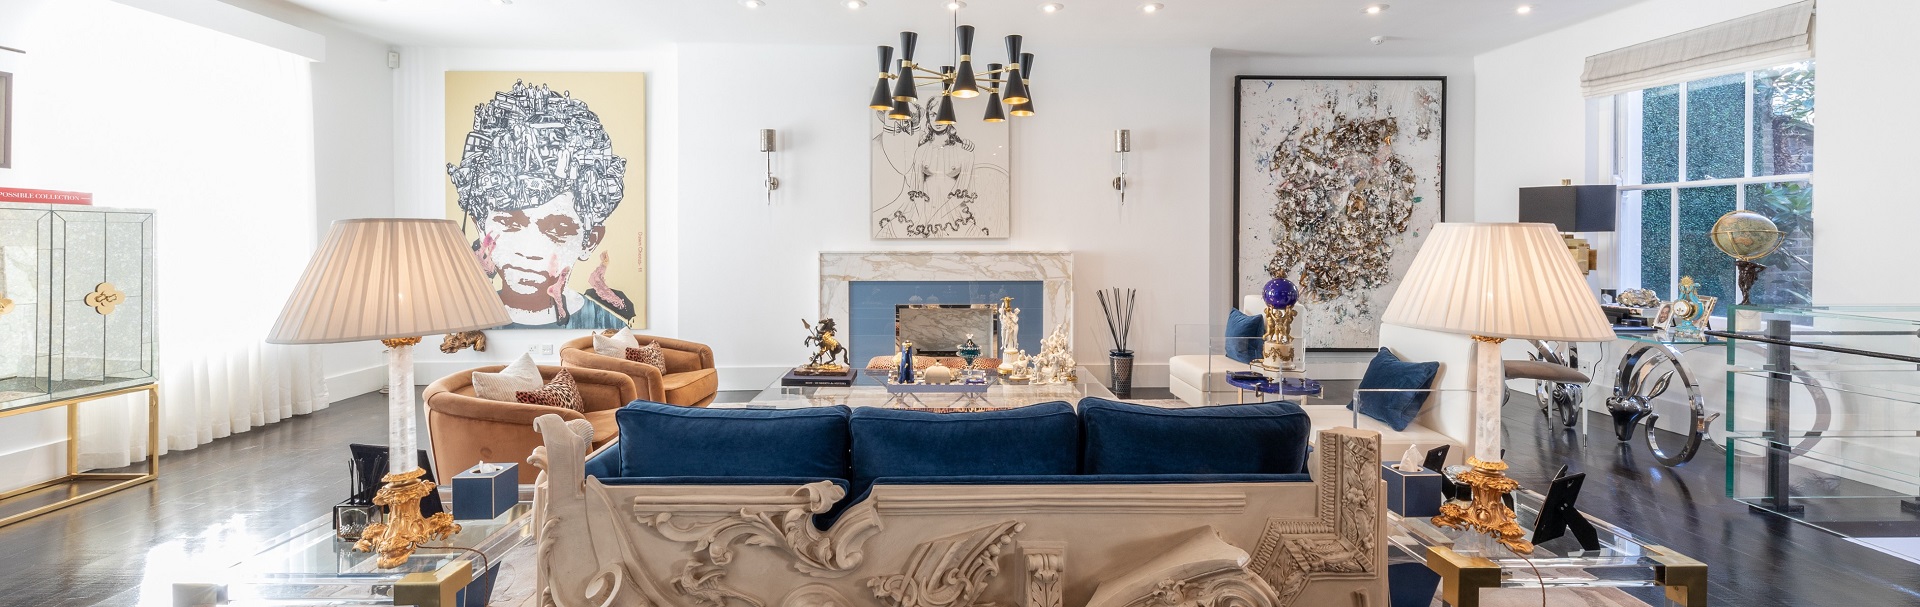 Find Out the Top Best Interior Design Projects In London!